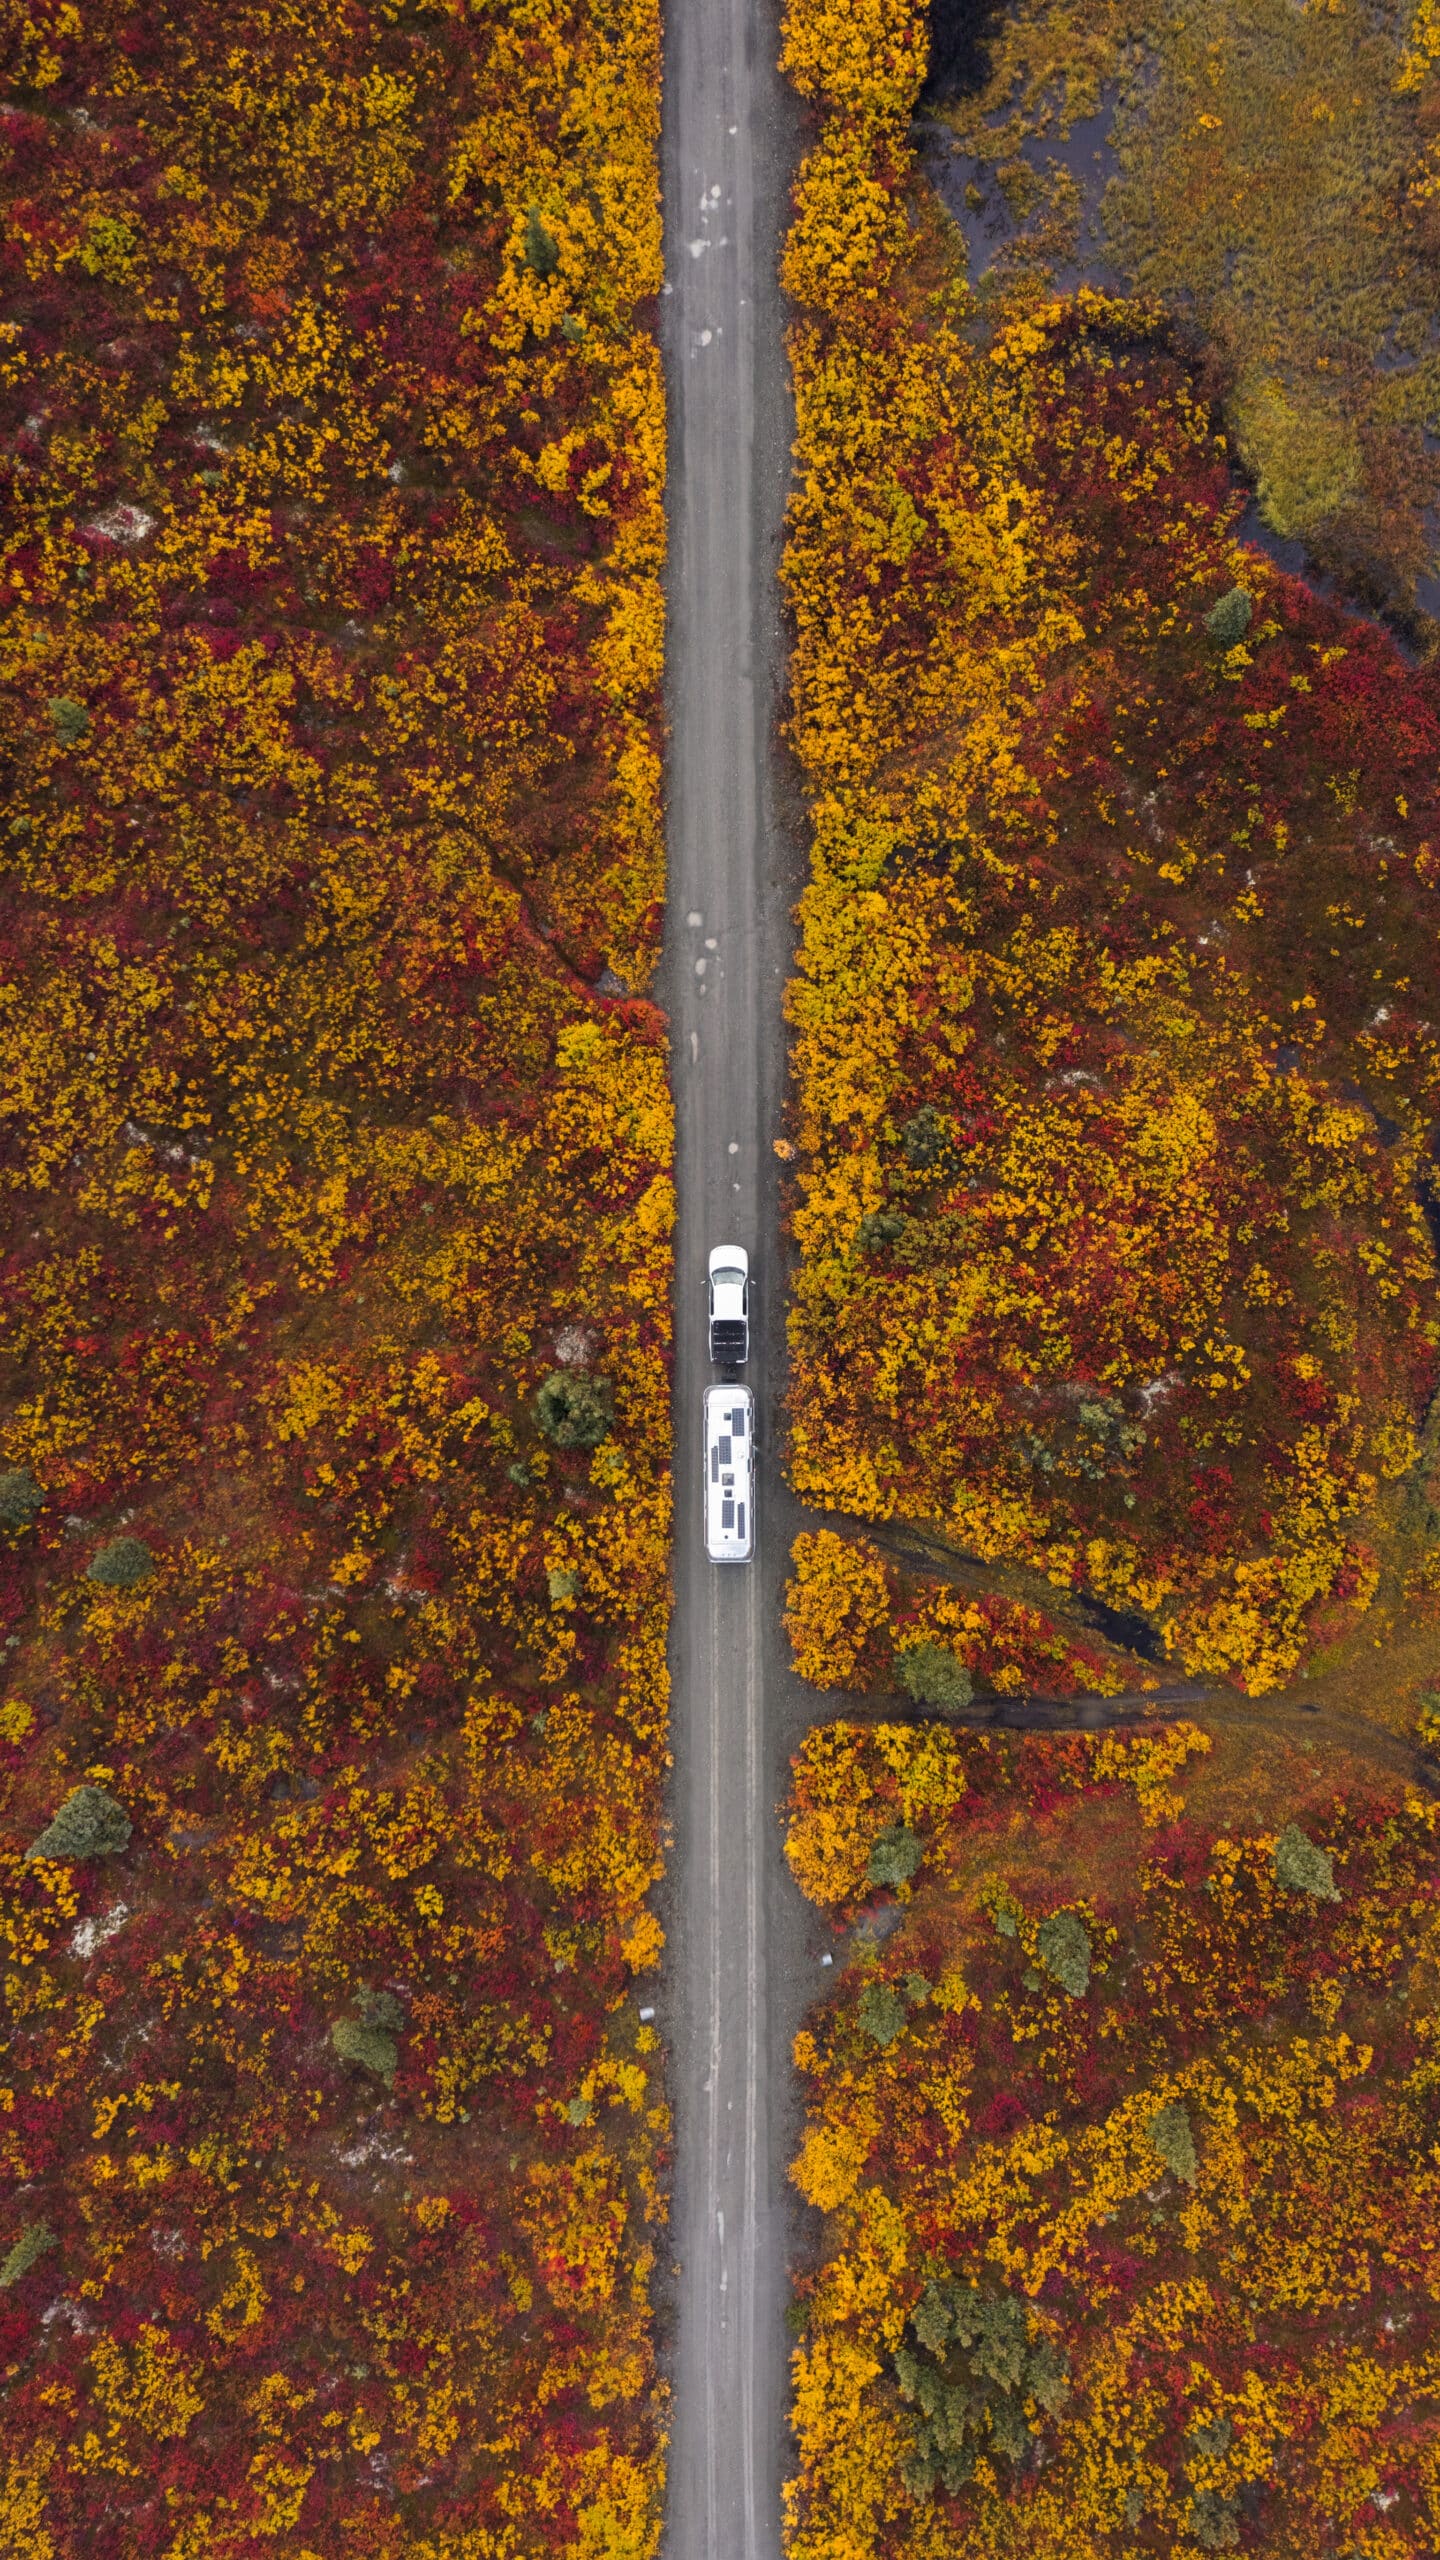 Areal View of a Truck Pulling an Airstream Camper Down a Road in Alaska in the Fall